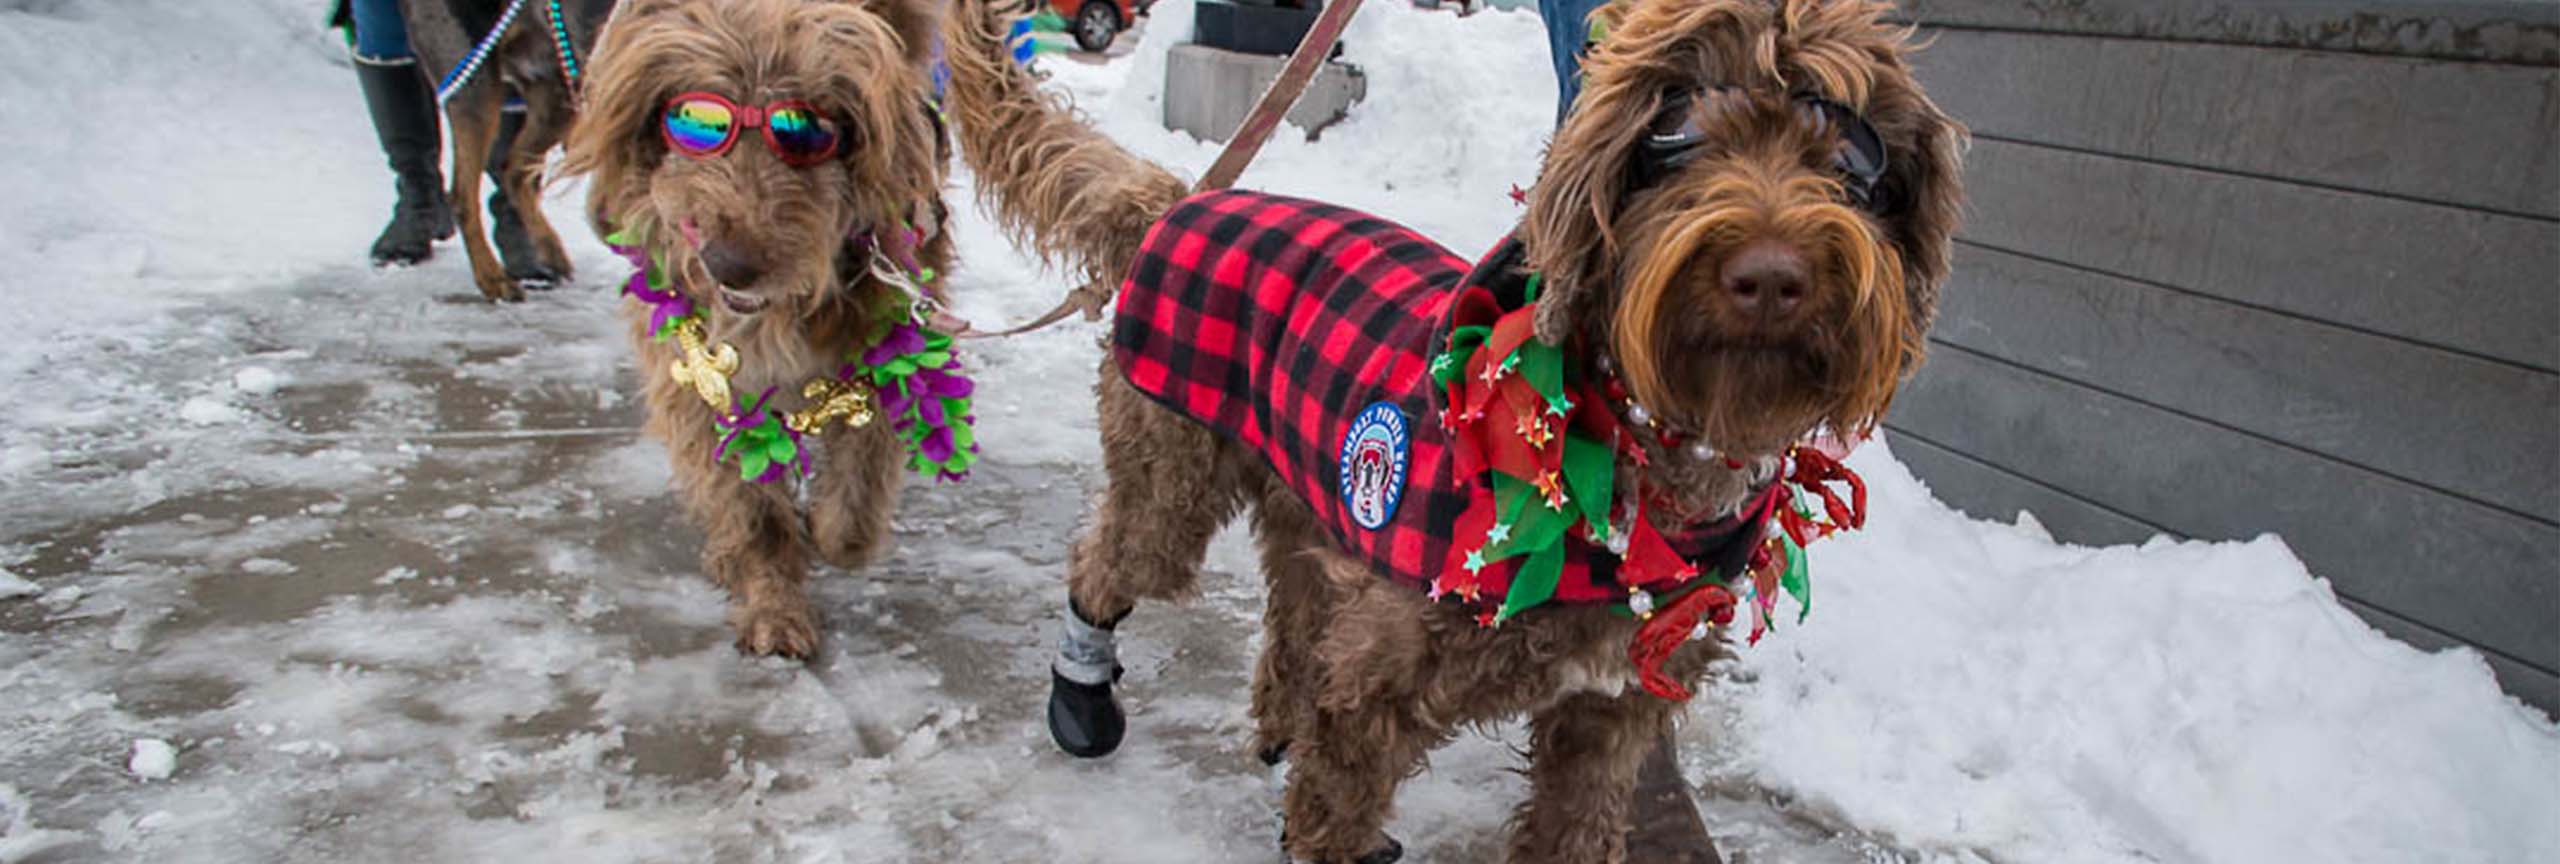 Two brown dogs dressed up in costumes in Mardi Gras 4Paws parade